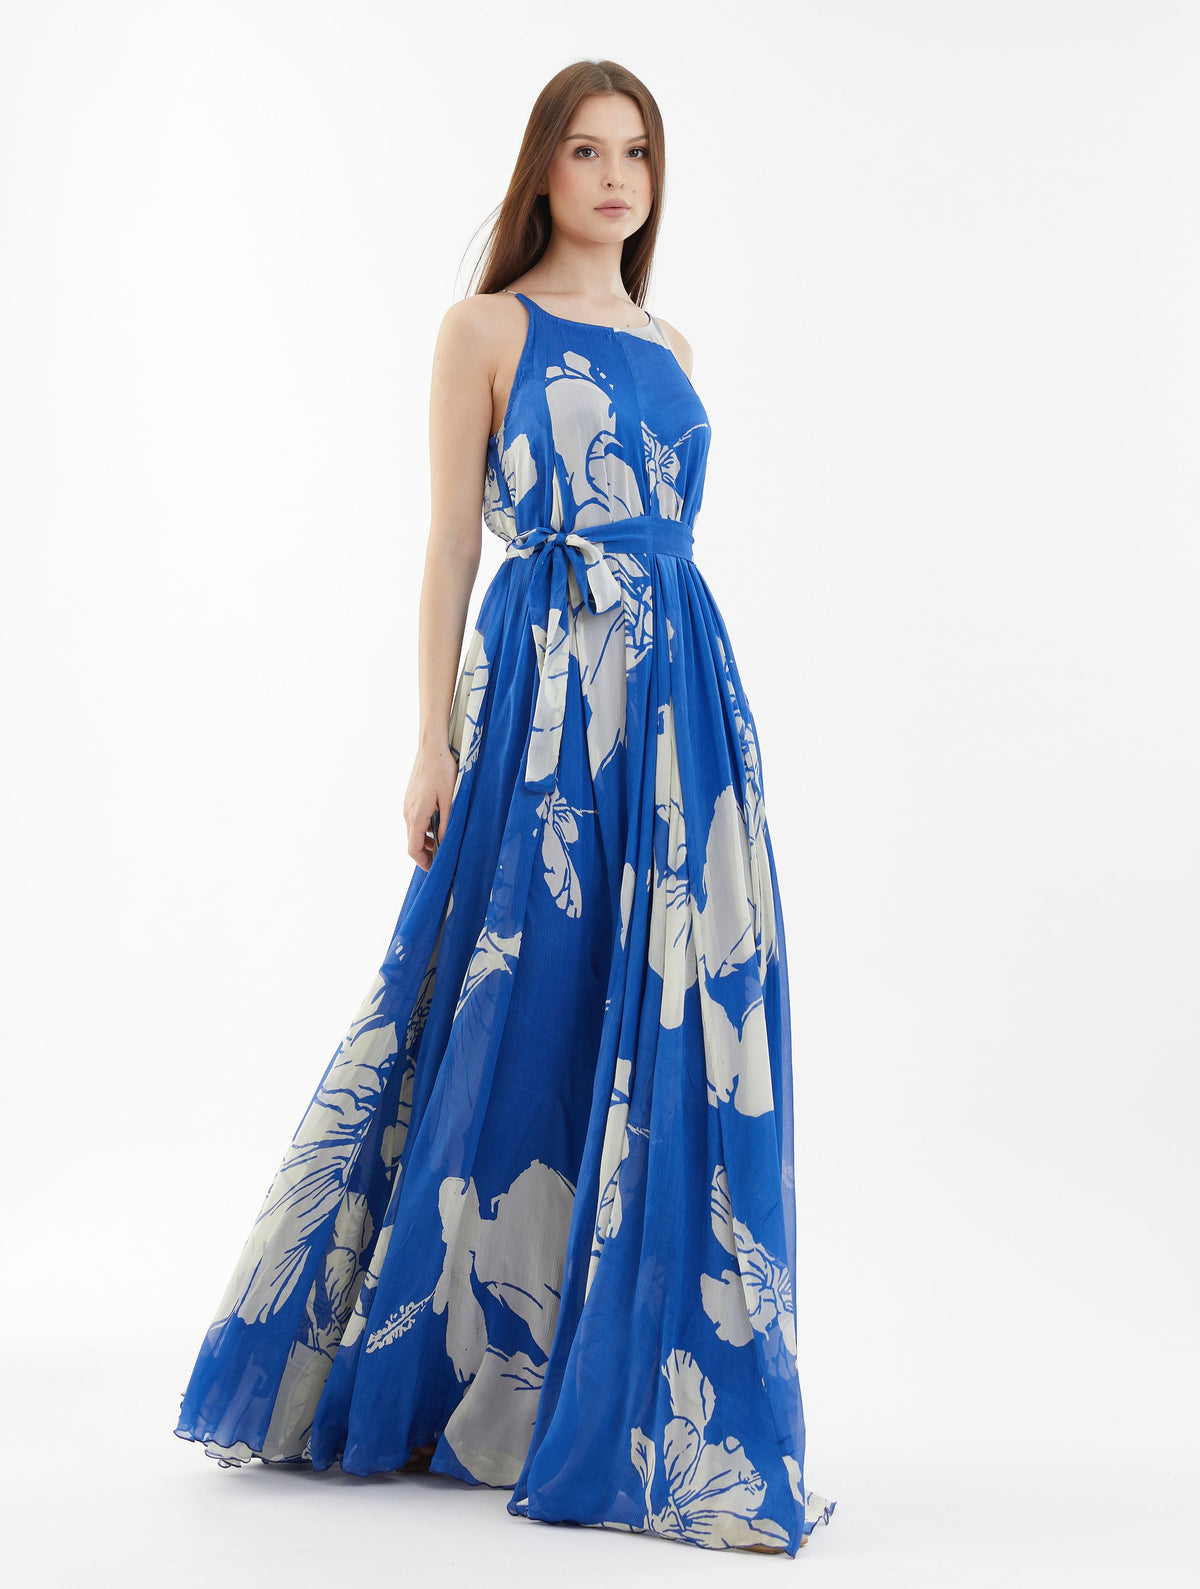 BLUE AND WHITE FLORAL SLEEVELESS LONG DRESS